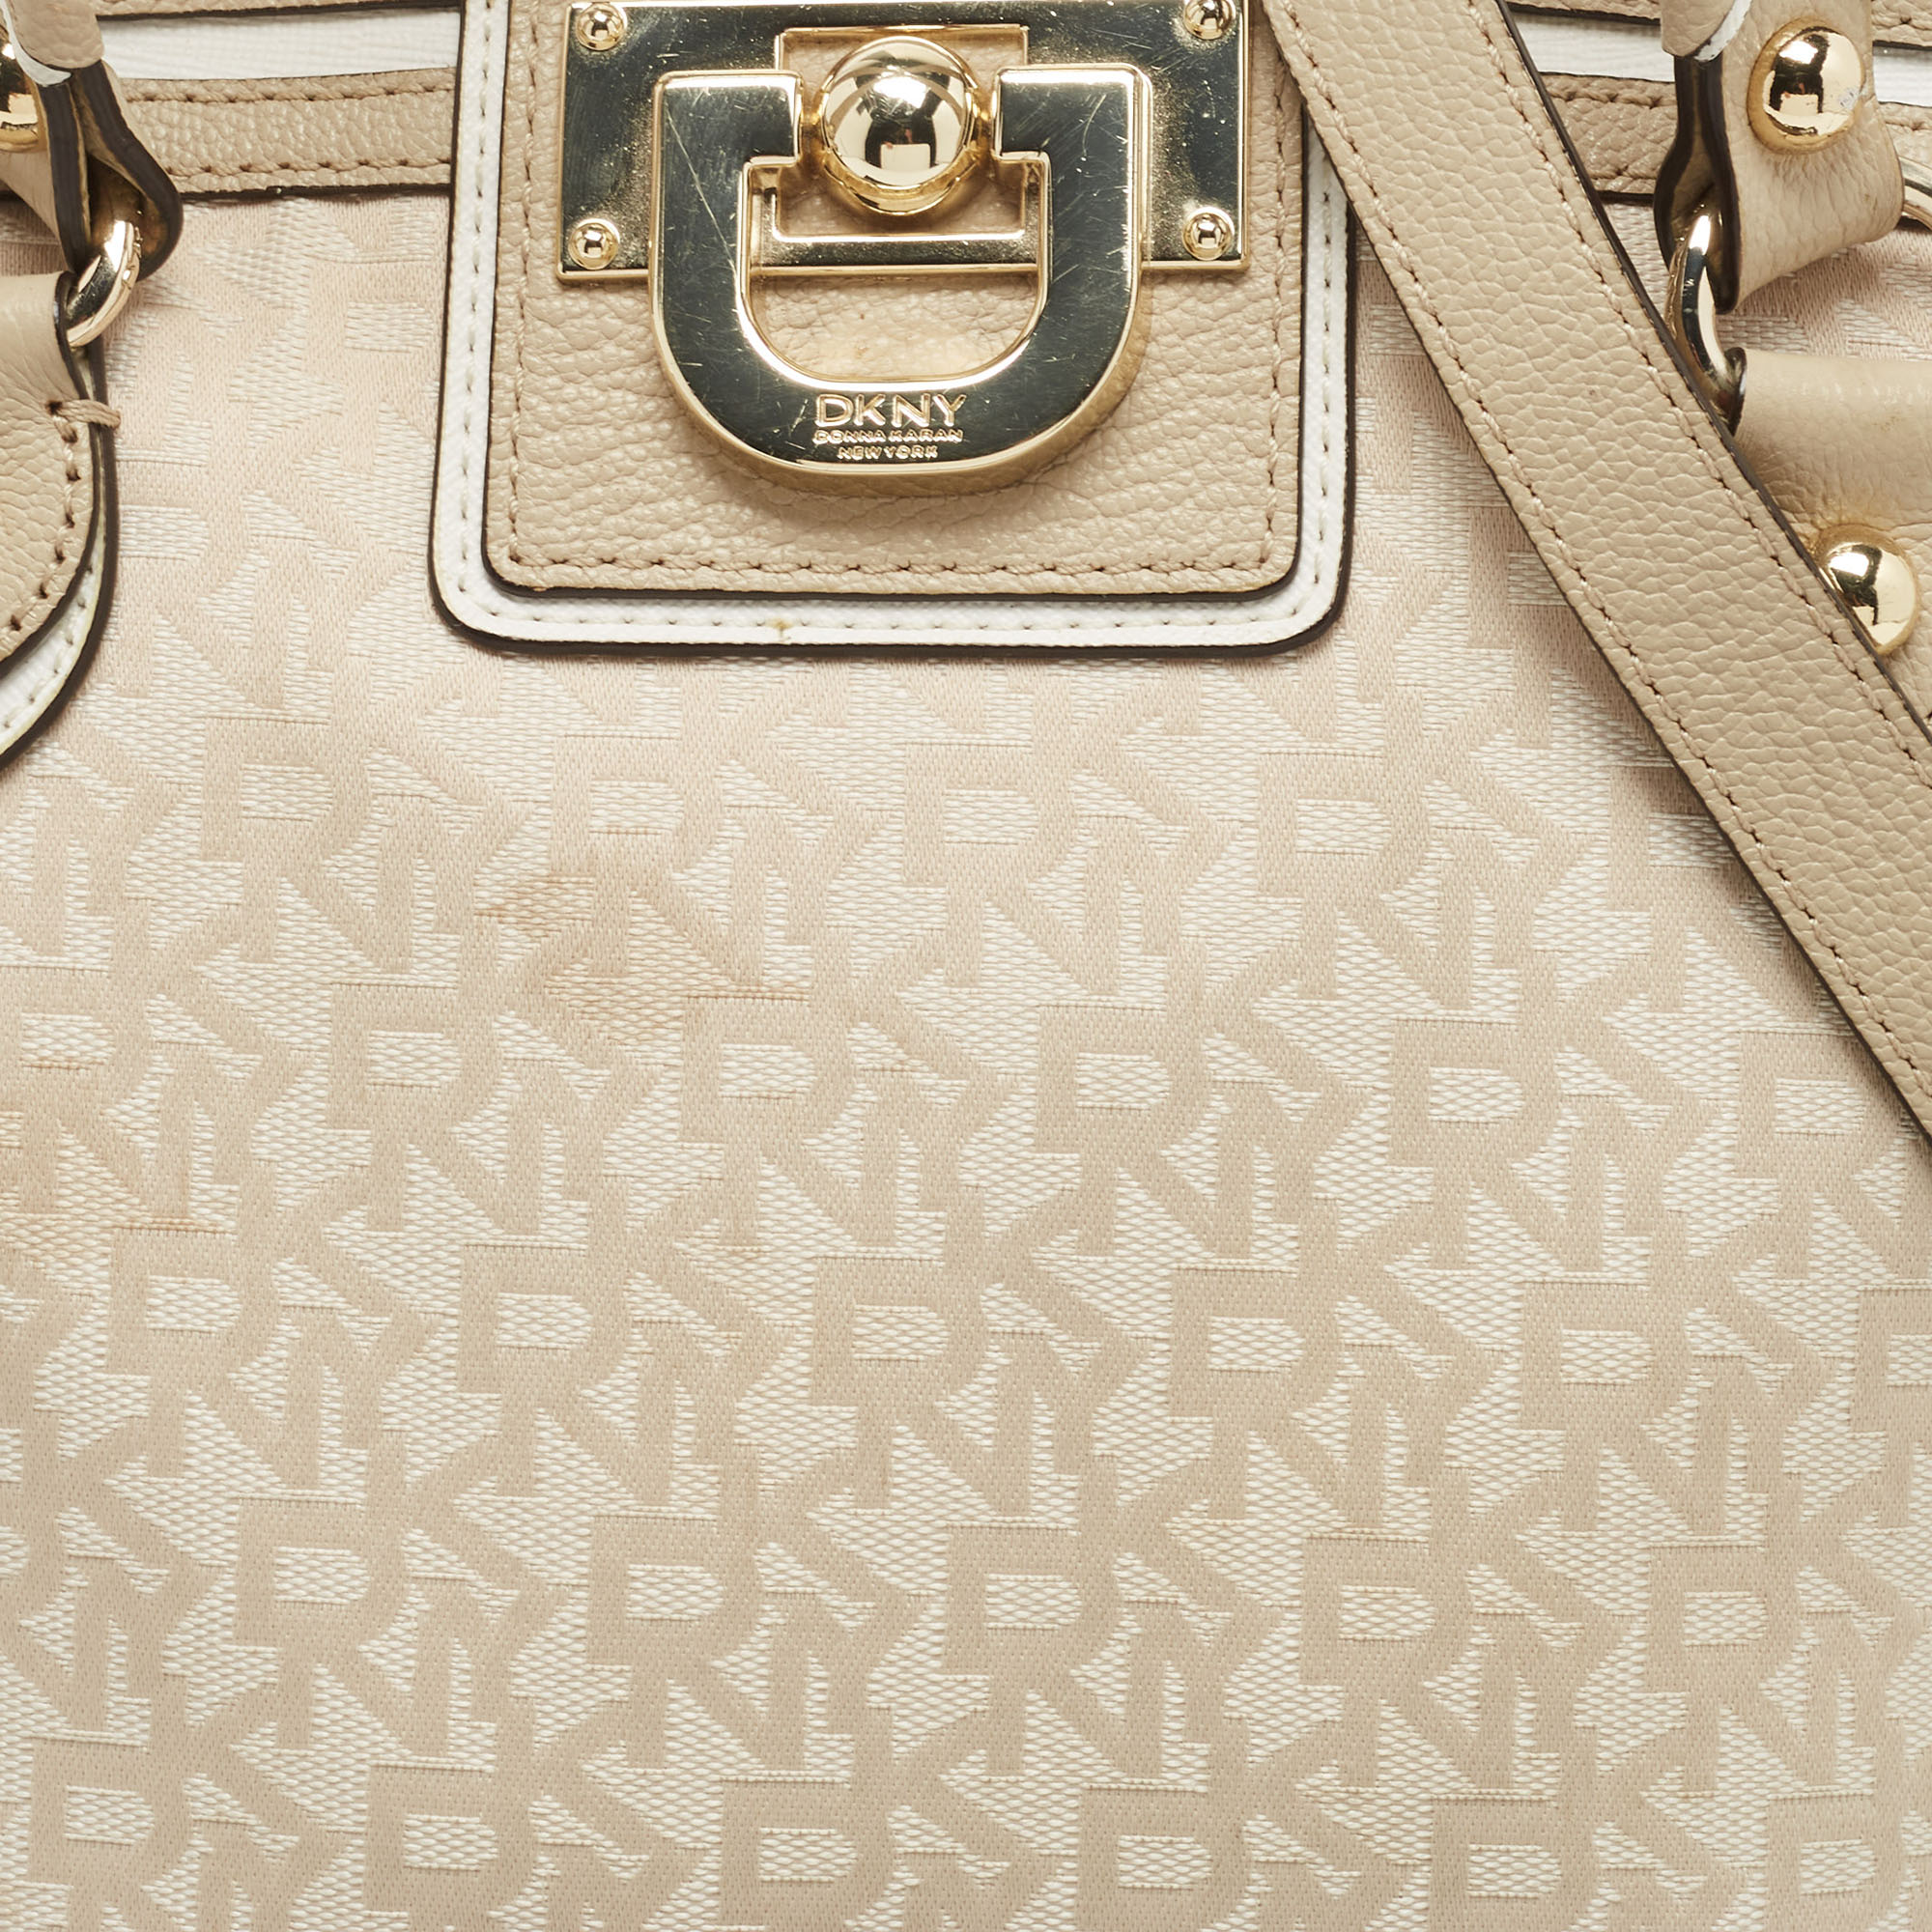 DKNY Cream/Beige Signature Canvas And Leather Dome Satchel